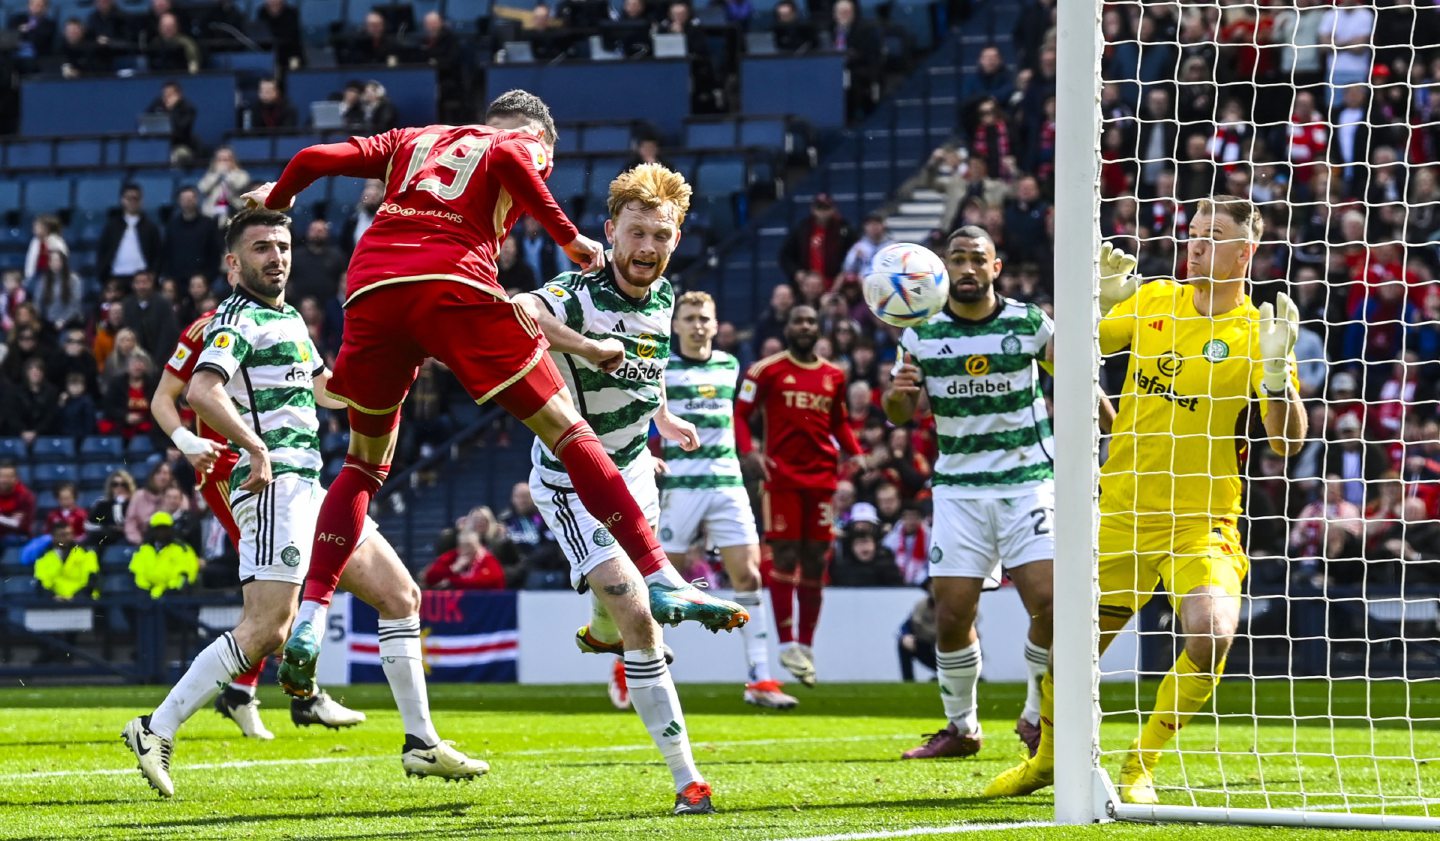 Aberdeen's Ester Sokler scores to make it 2-2 against Celtic in the Scottish Cup semi-final. Image: SNS